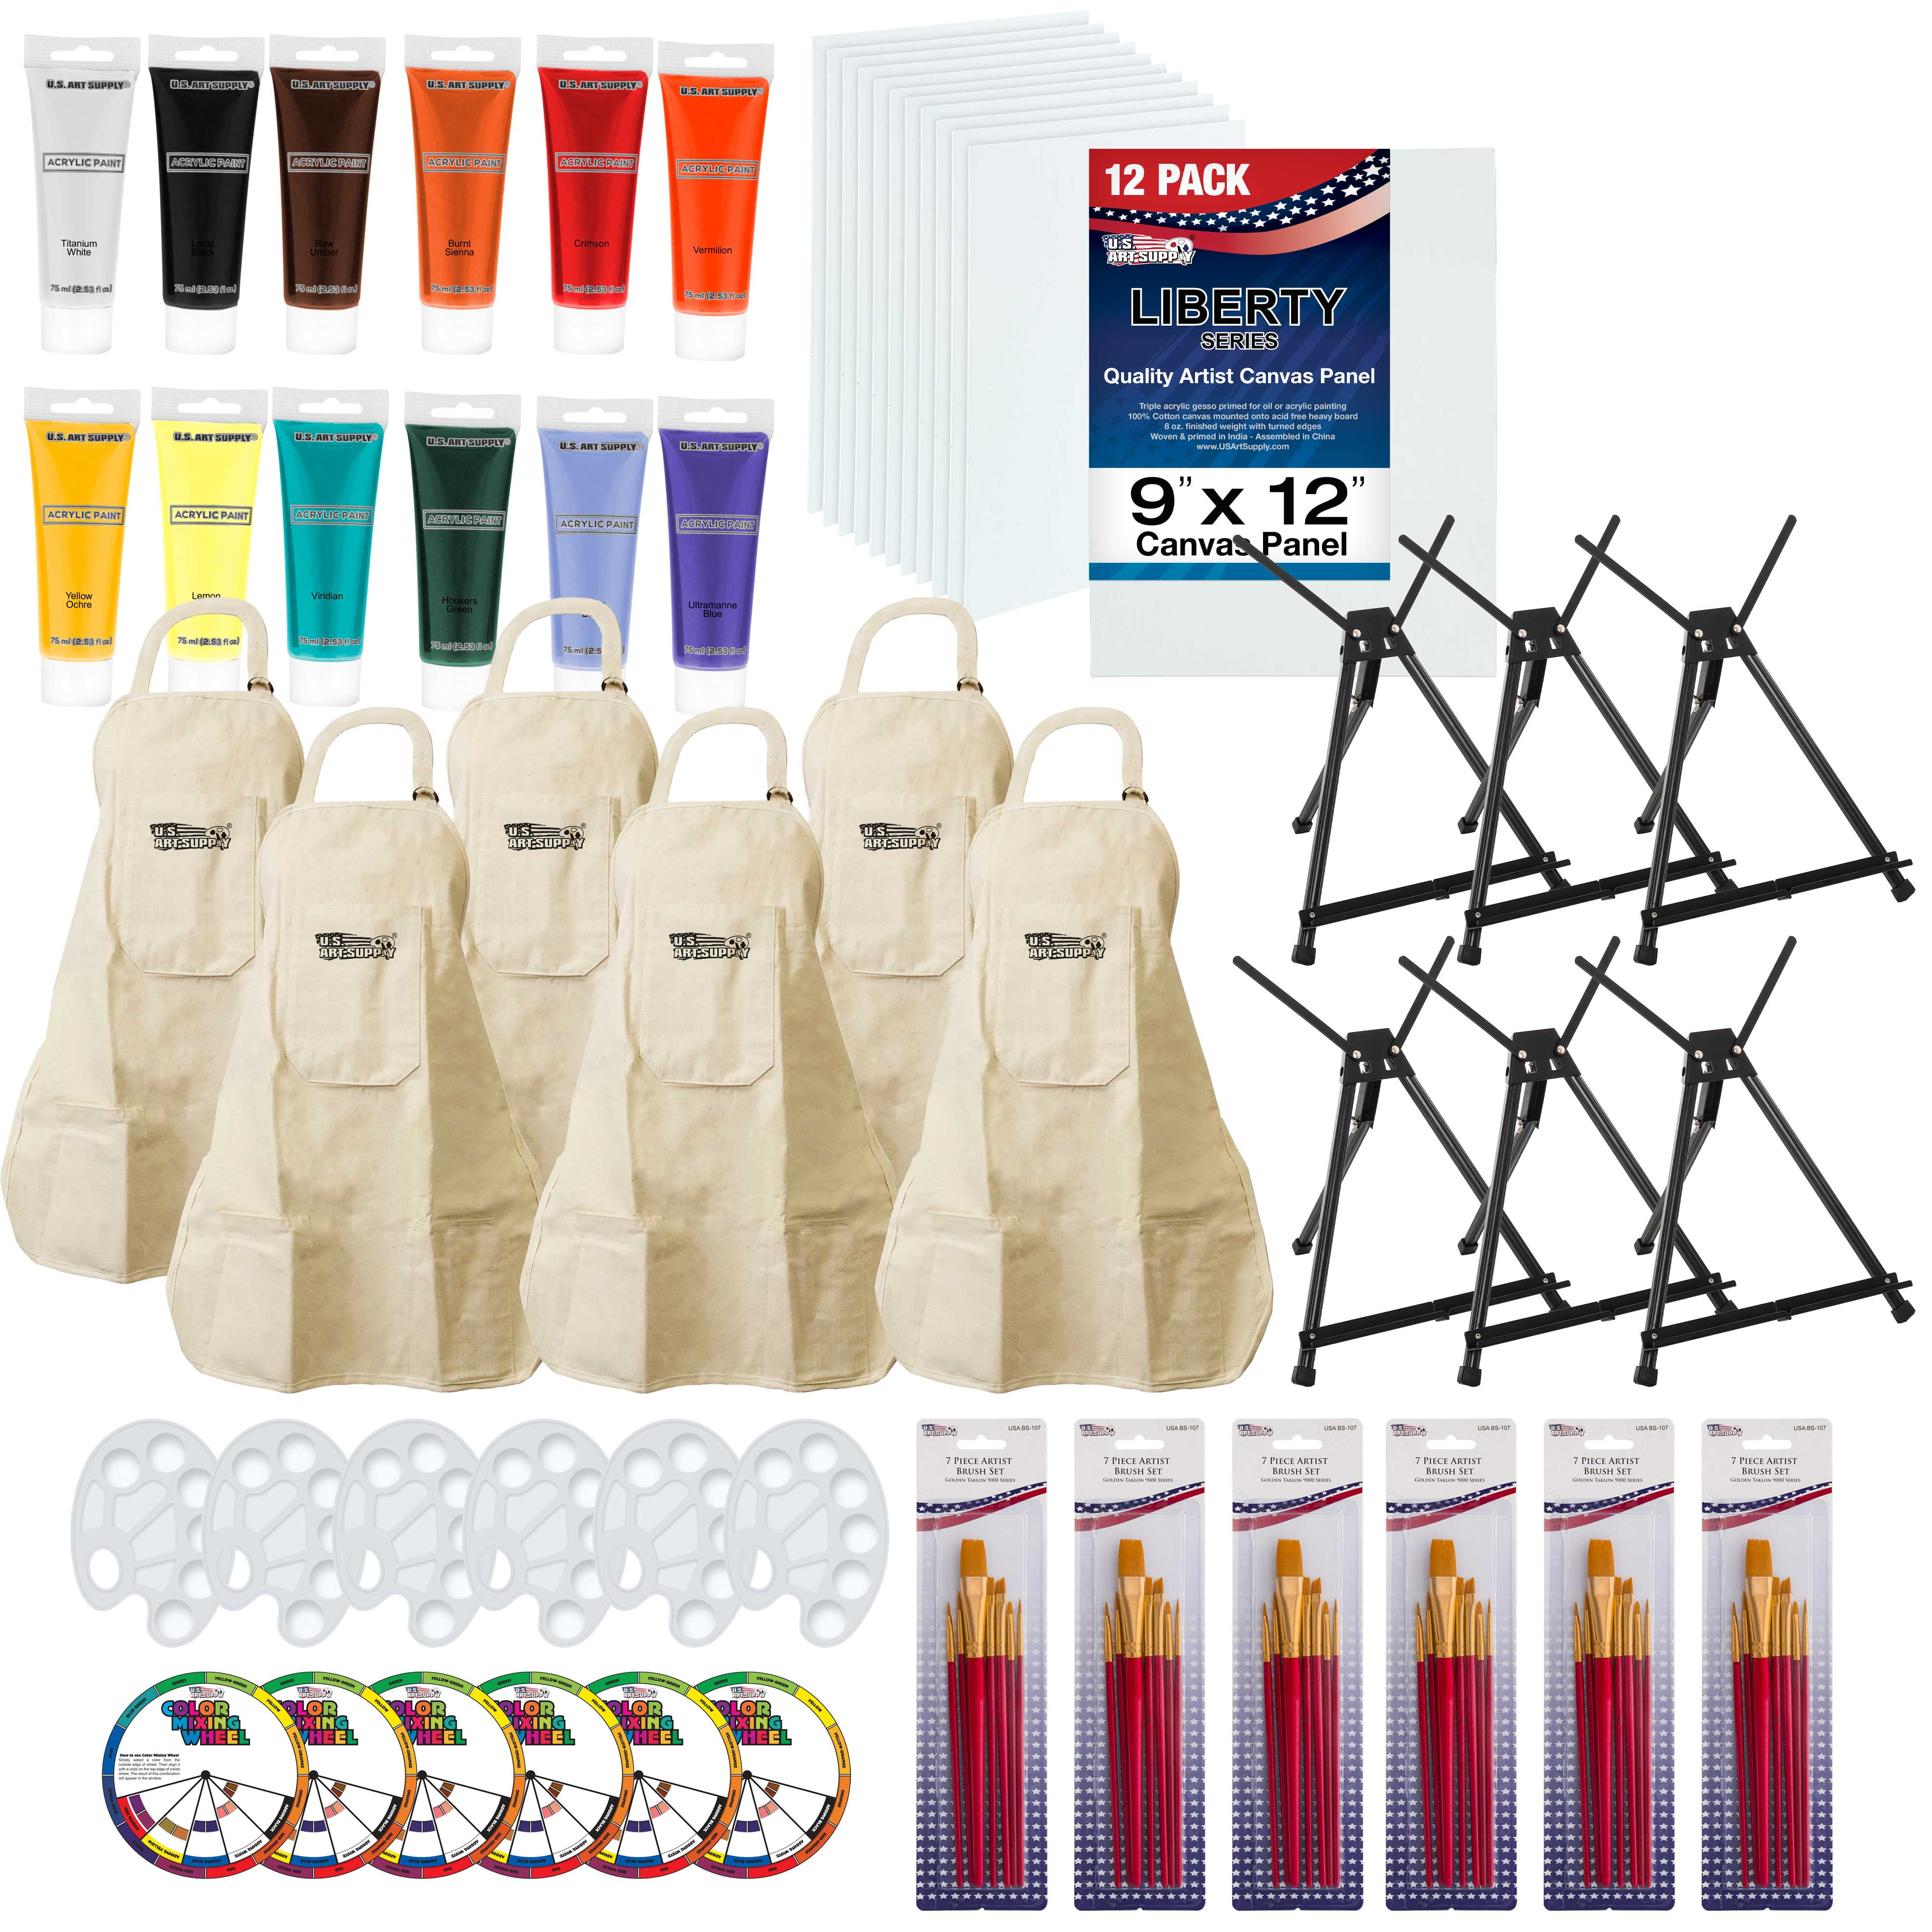  BARUN Paint and Sip Kit - Sip and Paint Kit Paint and